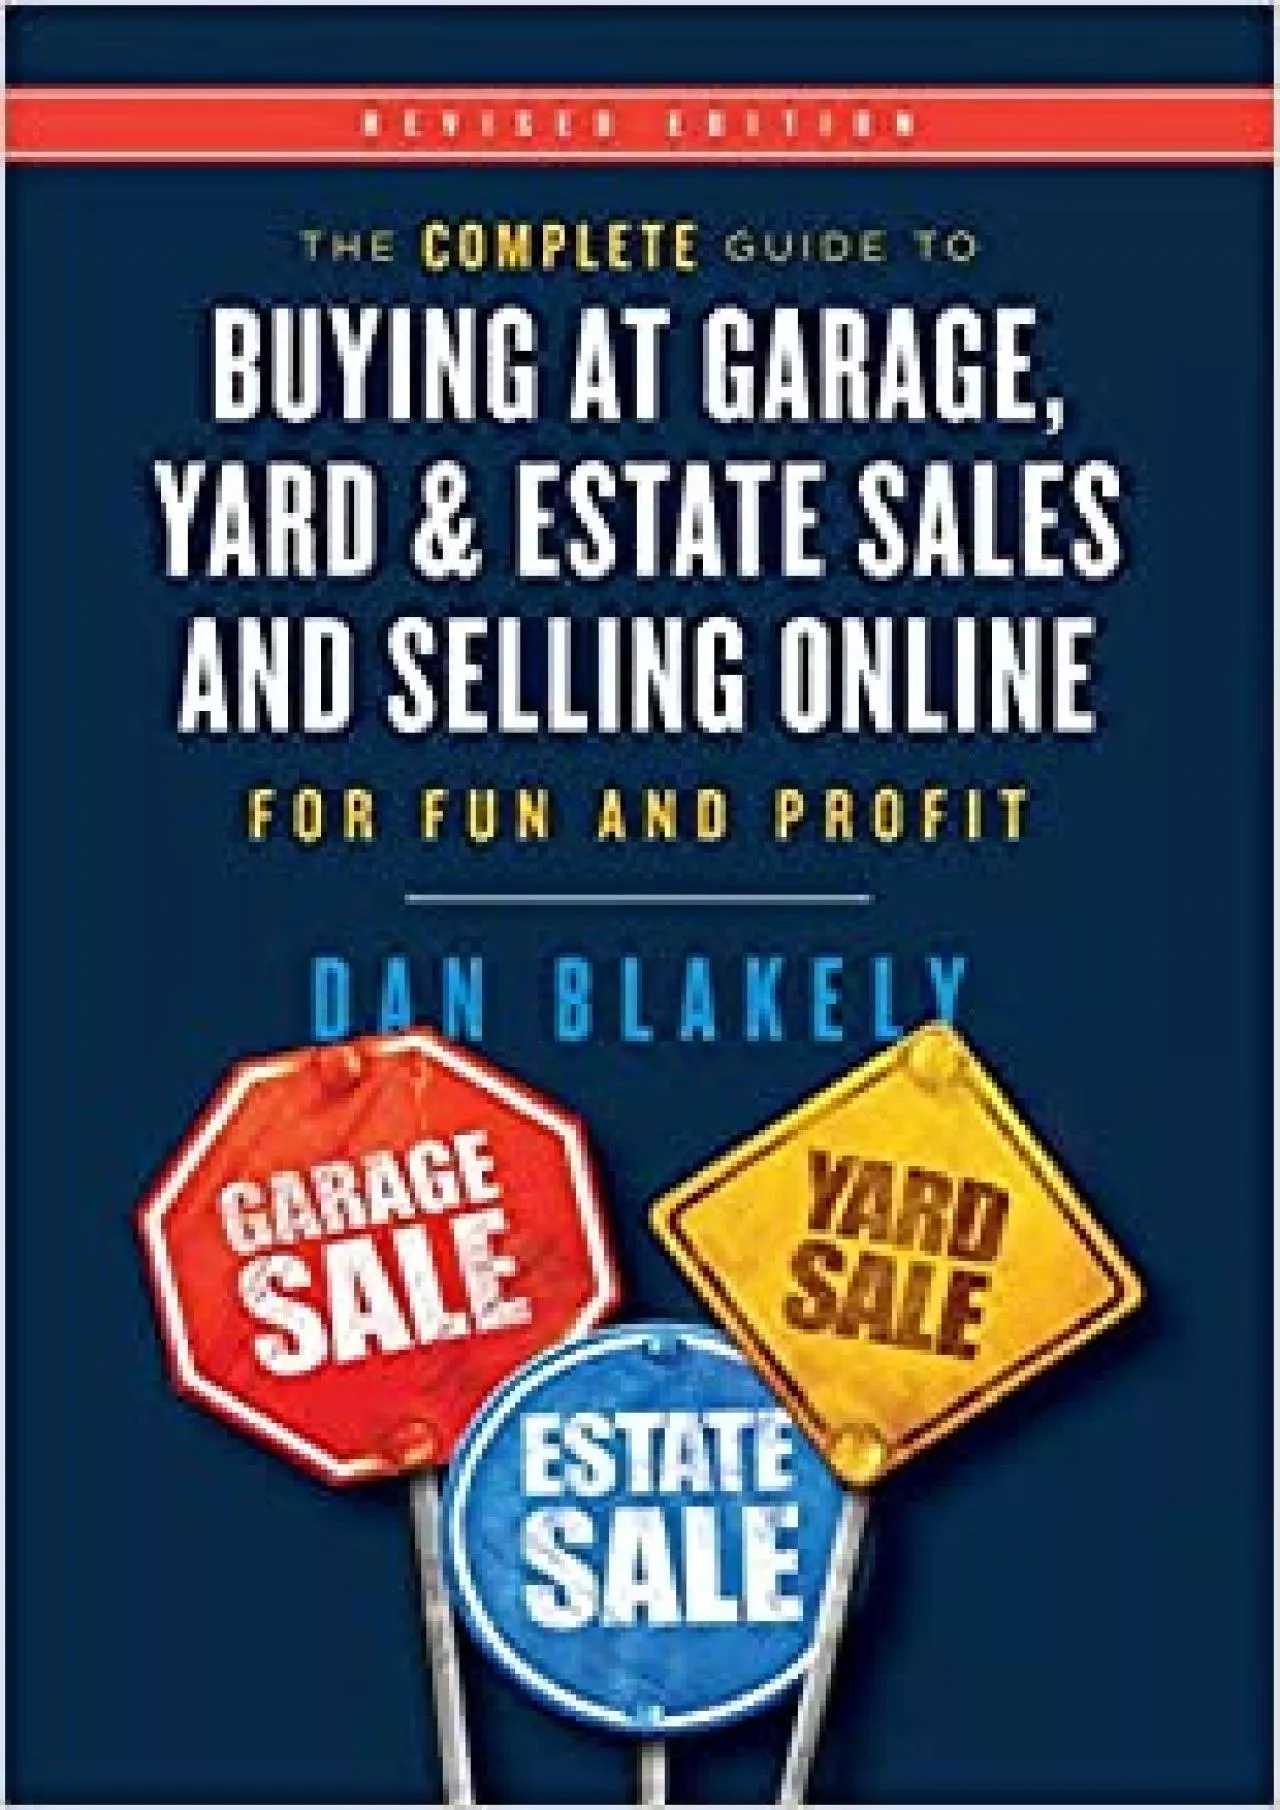 The Complete Guide to Buying at Garage Yard and Estate Sales and Selling Online for Fun